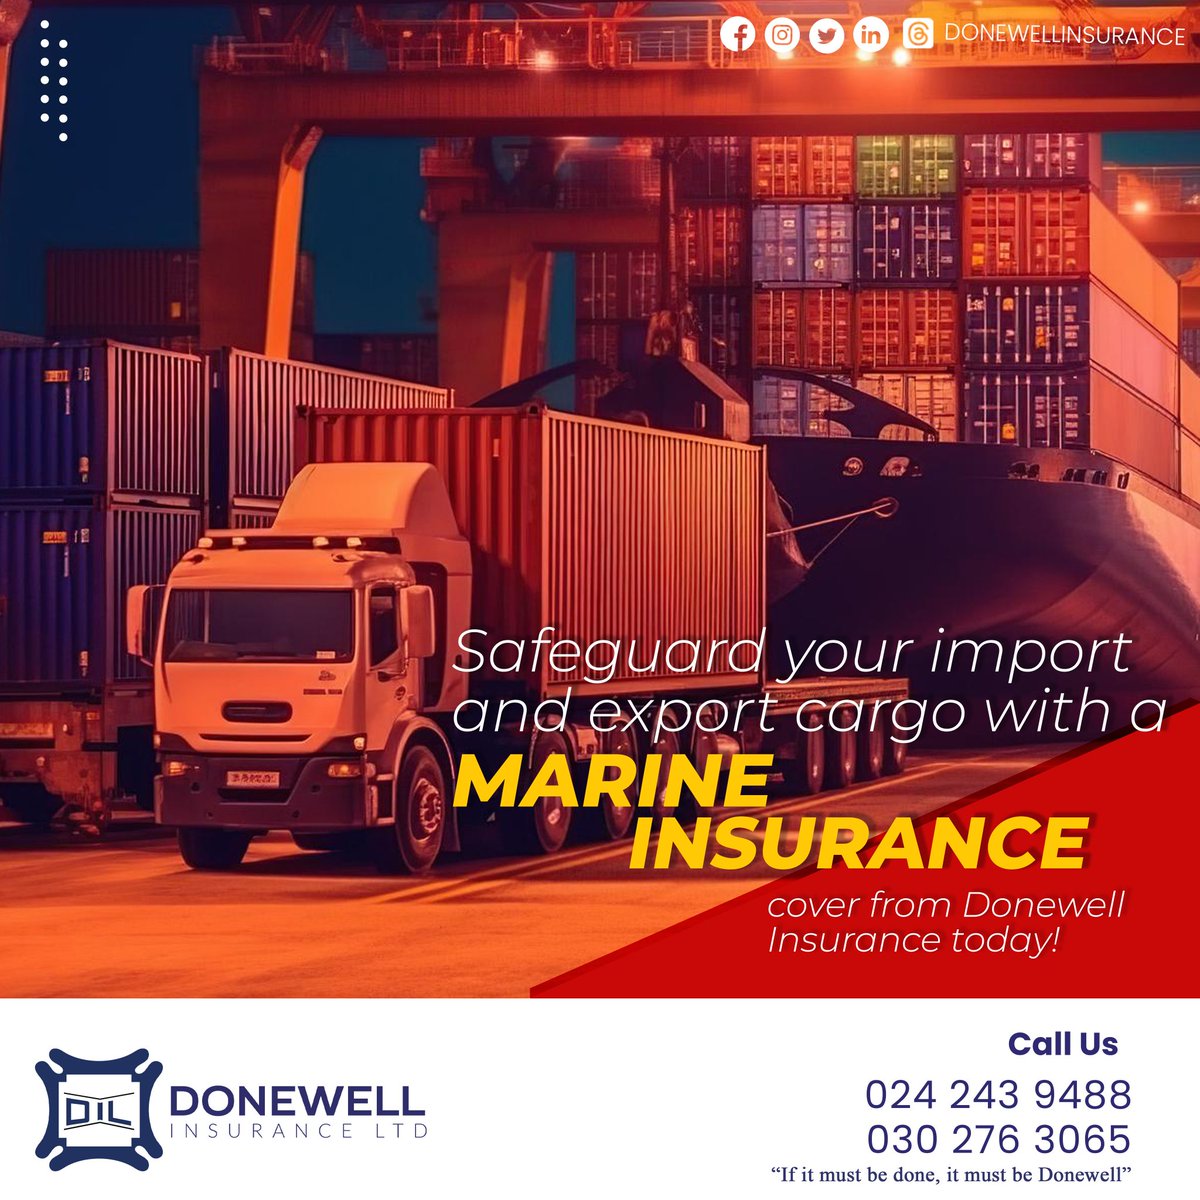 We have a policy to cover your imports and exports. Leave us a message and we will call you.

#marineinsurance #cargoinsurance #donewellinsurance